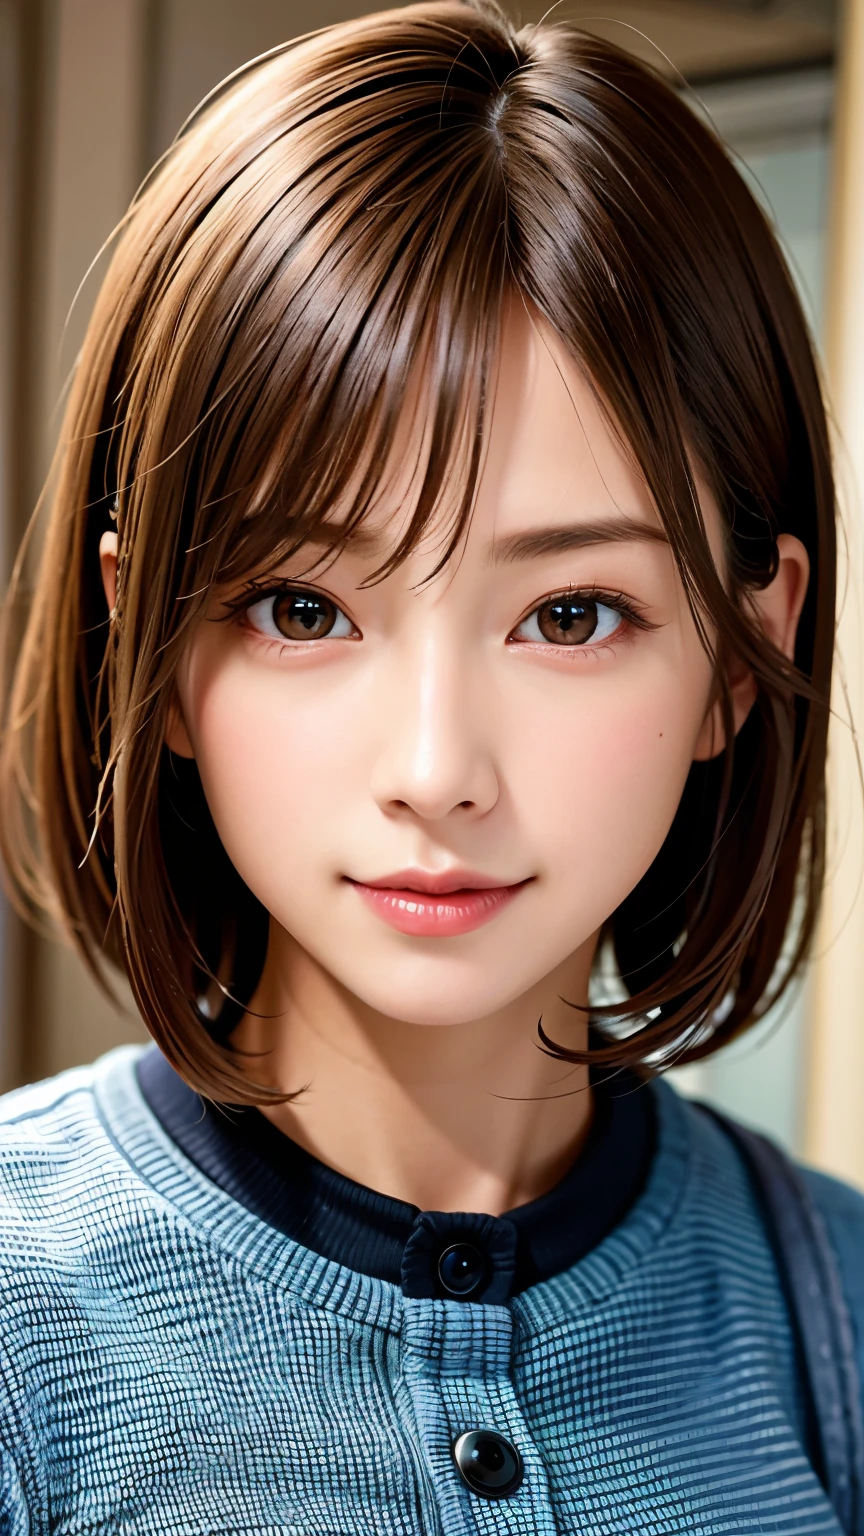 masterpiece, 最high quality, Ultra-high resolution, (Realistic:1.4), Beautiful face in every detail, High Quality Clothing, Amazing European Women, very cute, Portraiture, Soft skin and perfect face、Perfect Face, Shoot your hair, 8K resolution,Super Realistic,Very detailed,high quality, A broad perspective